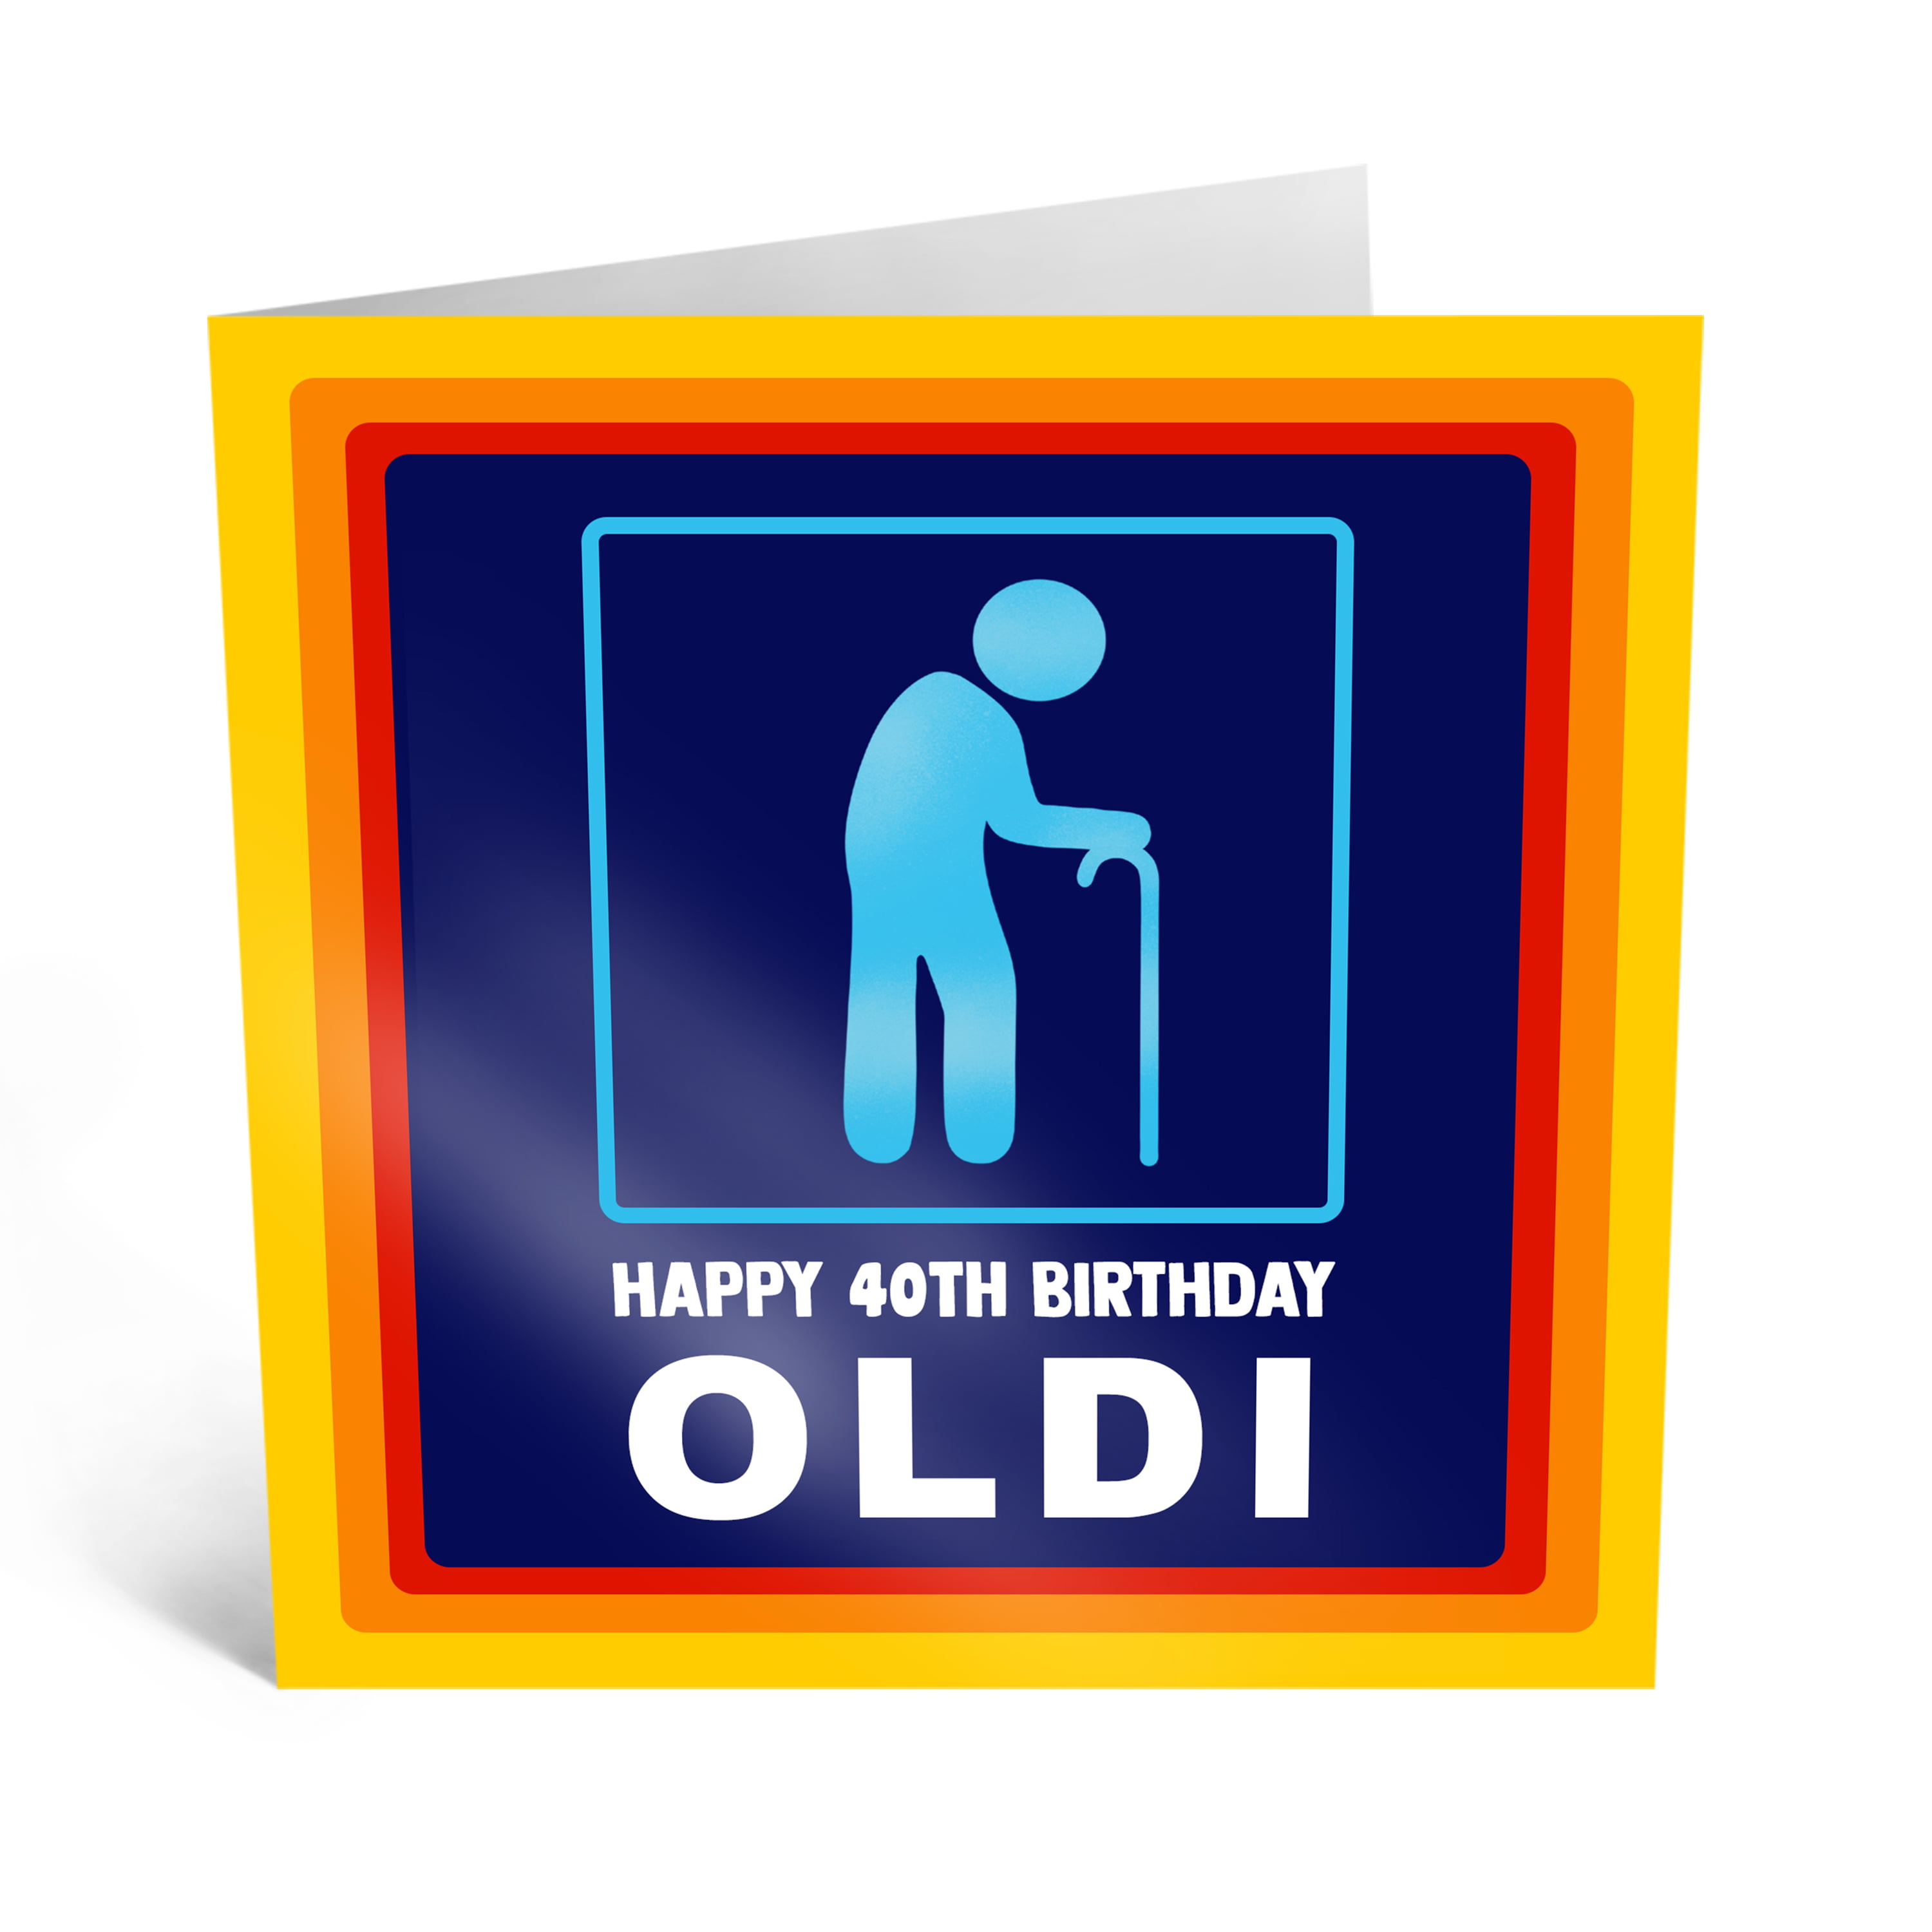 40th Birthday Card for Men - ' Happy 40th Birthday Oldi ' - Funny Gift for  His Fortieth - Birthday Cards for Husband Dad - Age 40 - Forties - Comes  with Fun Stickers - By Central 23 